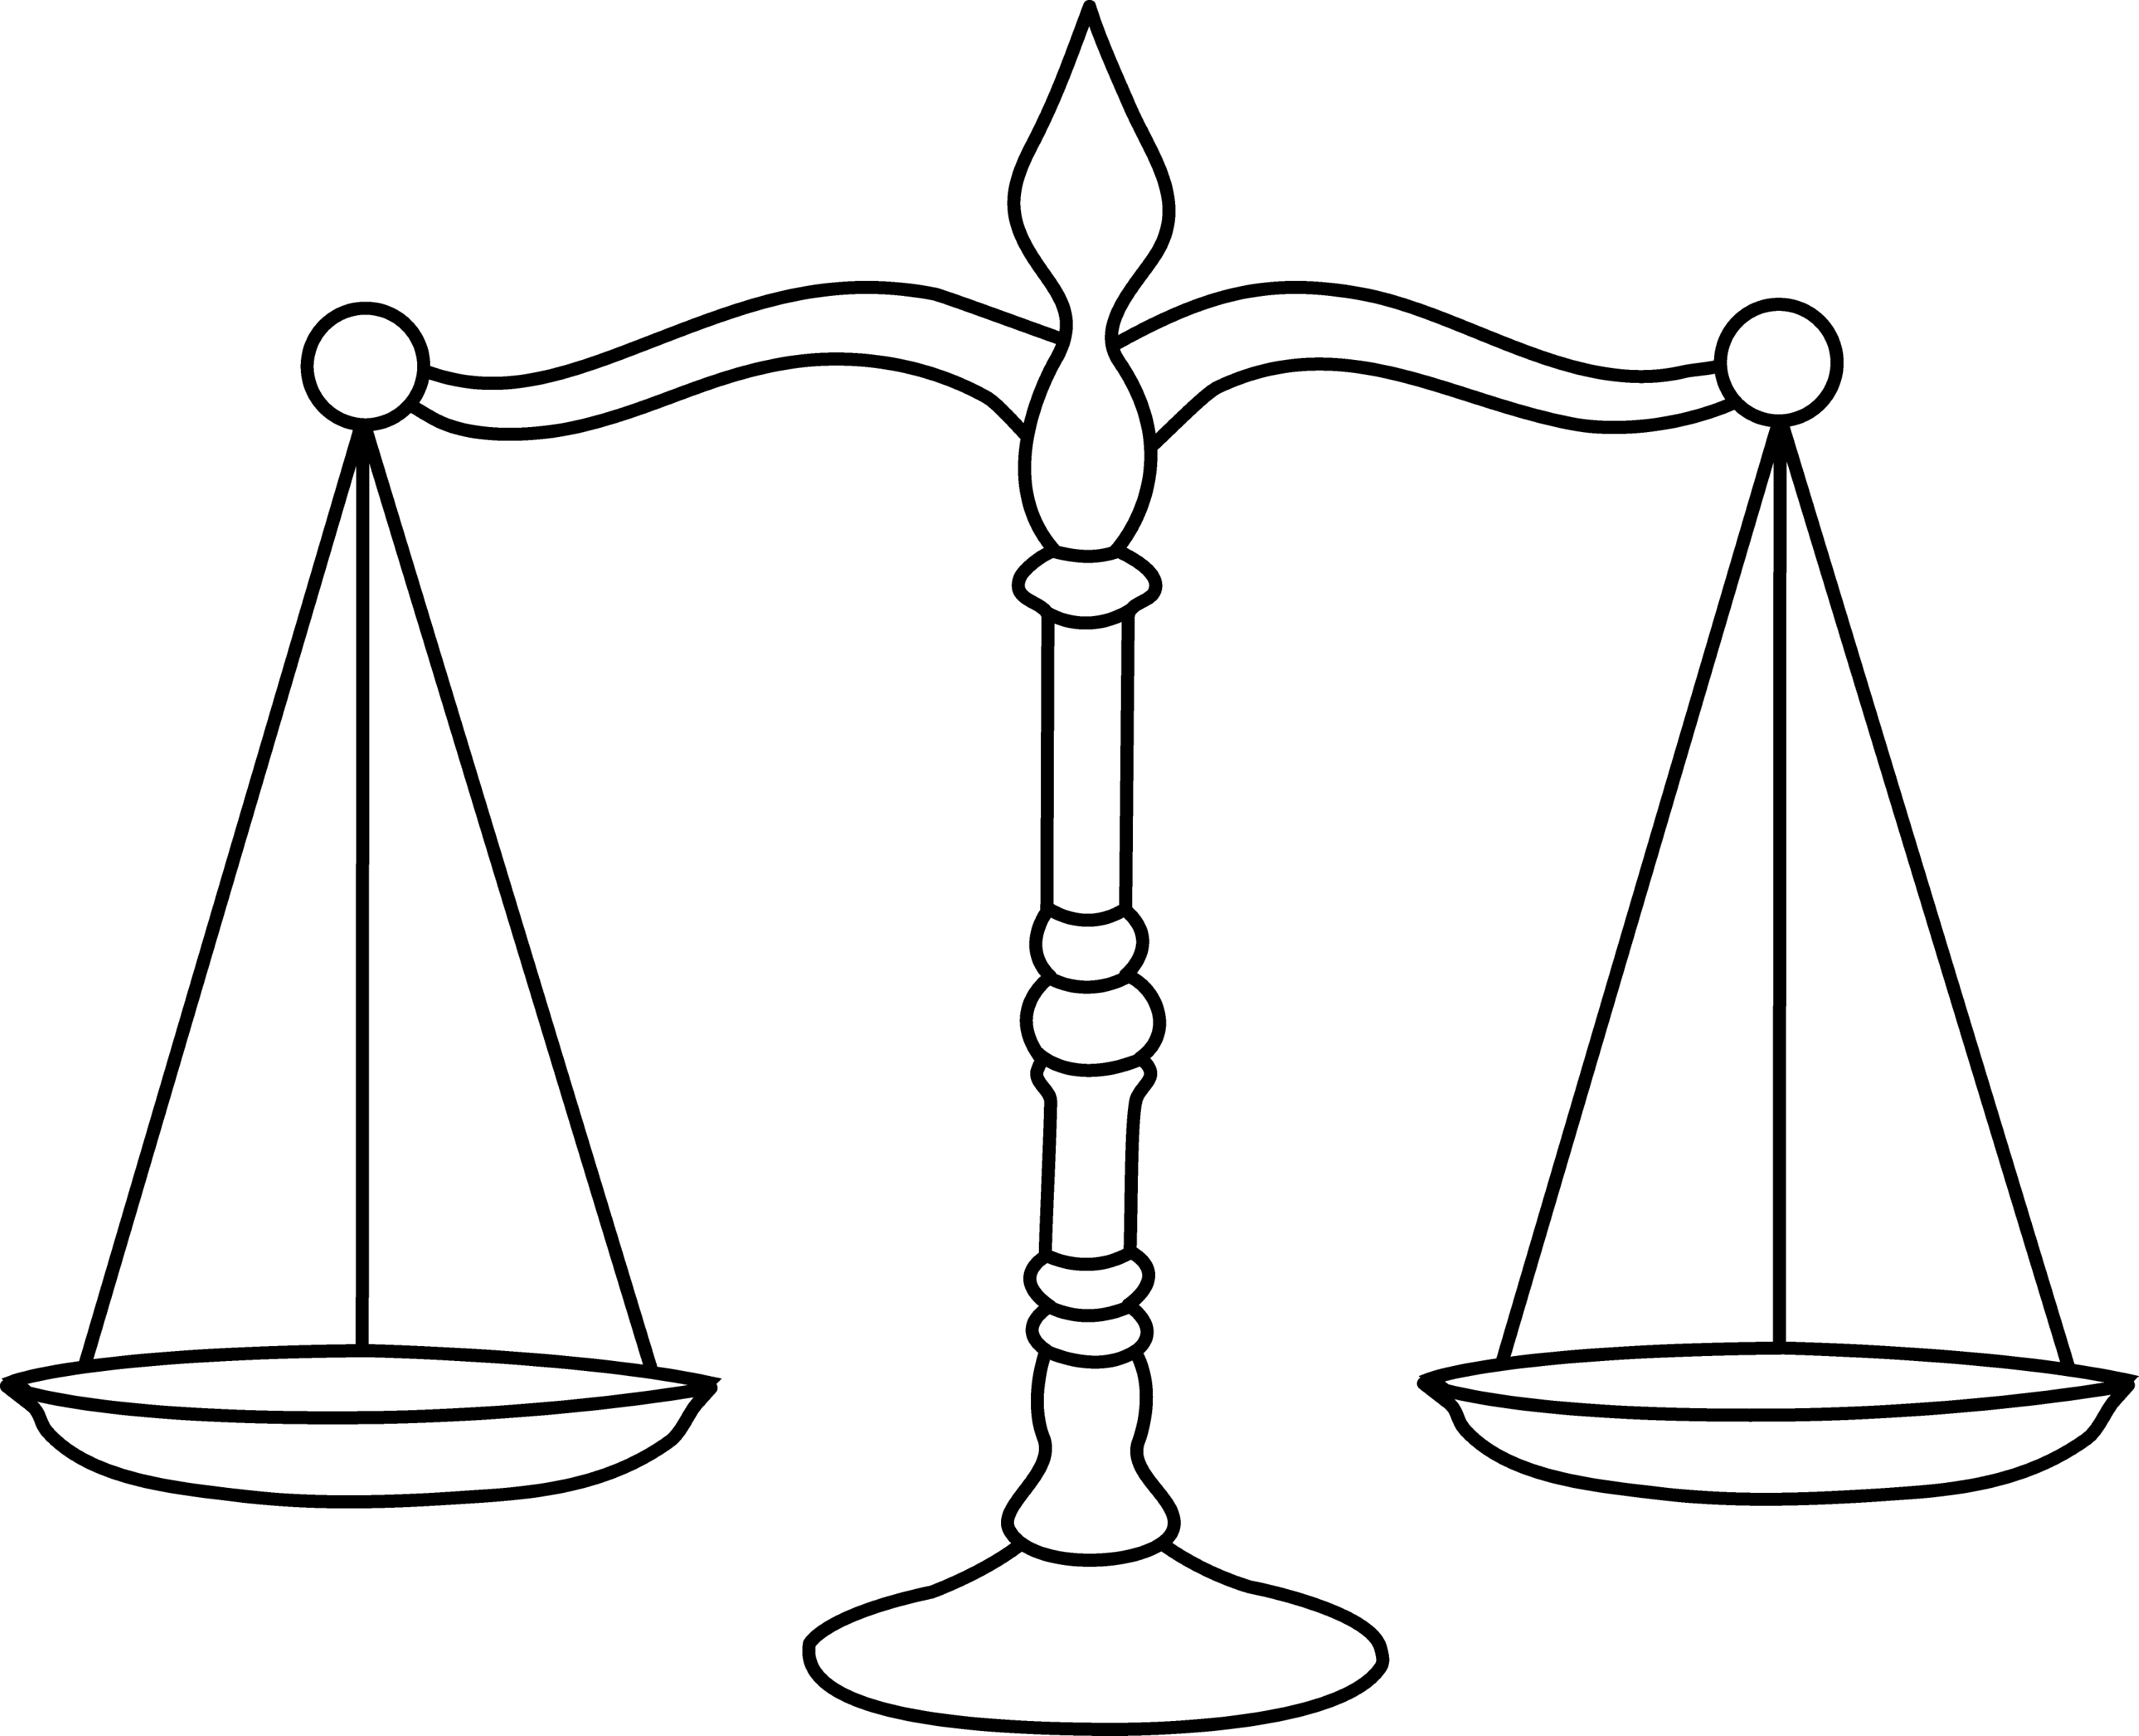 legal scales clipart - photo #24